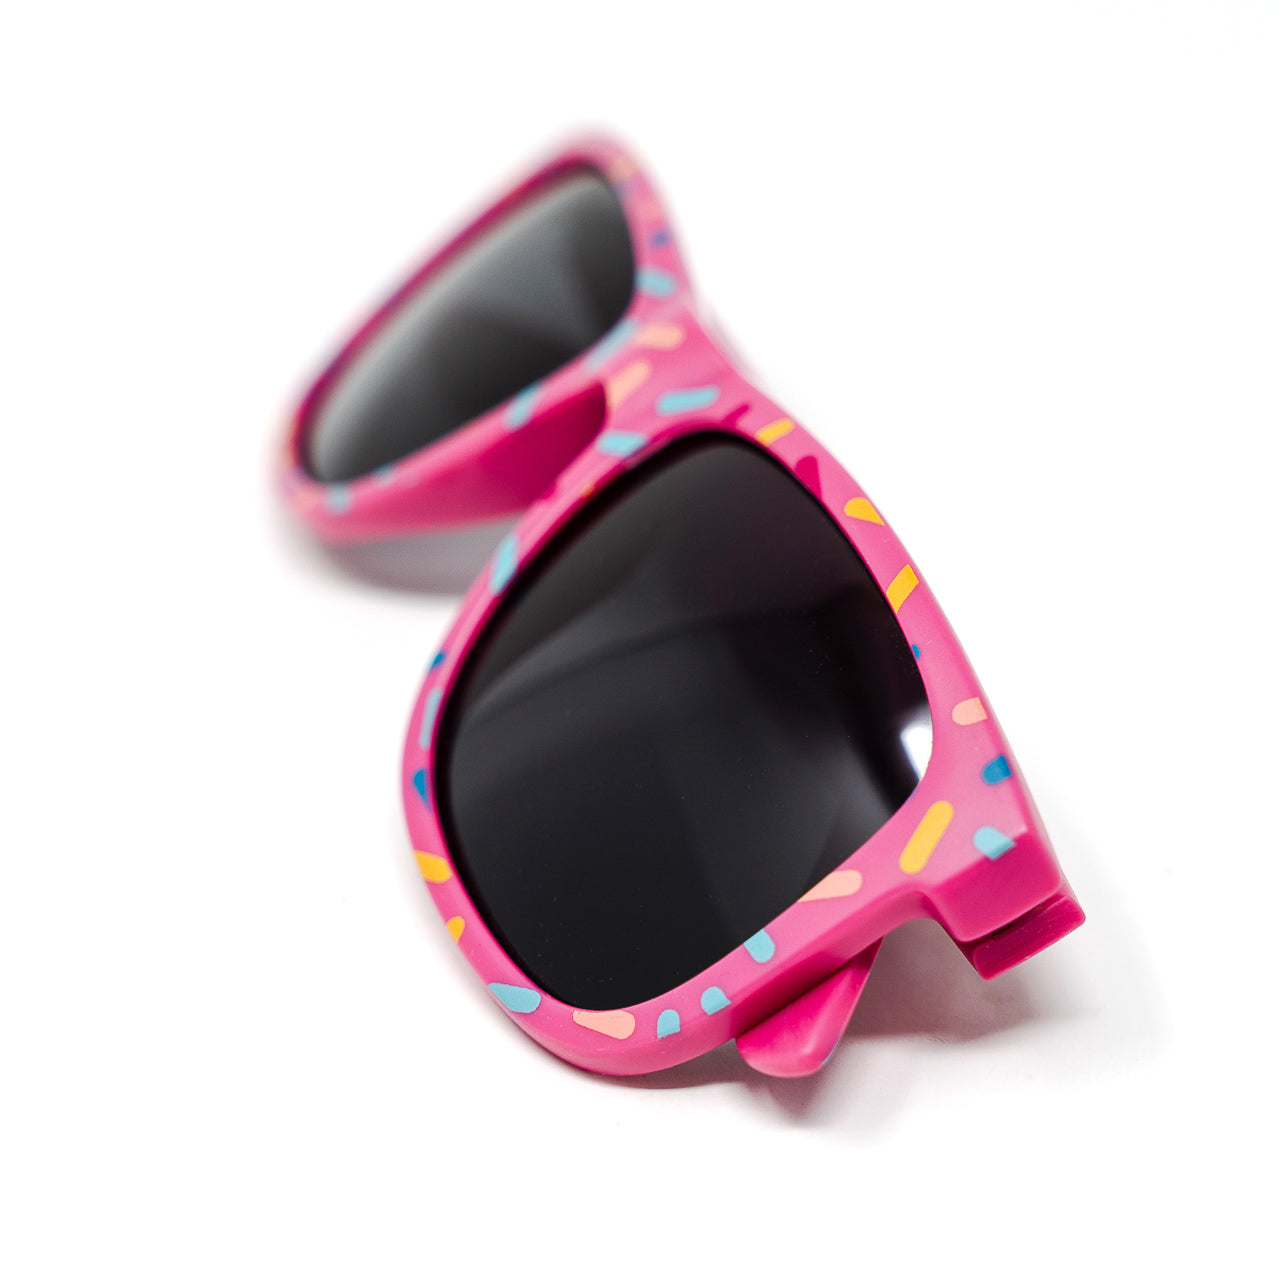 Frenchies Sprinkle Sunglasses